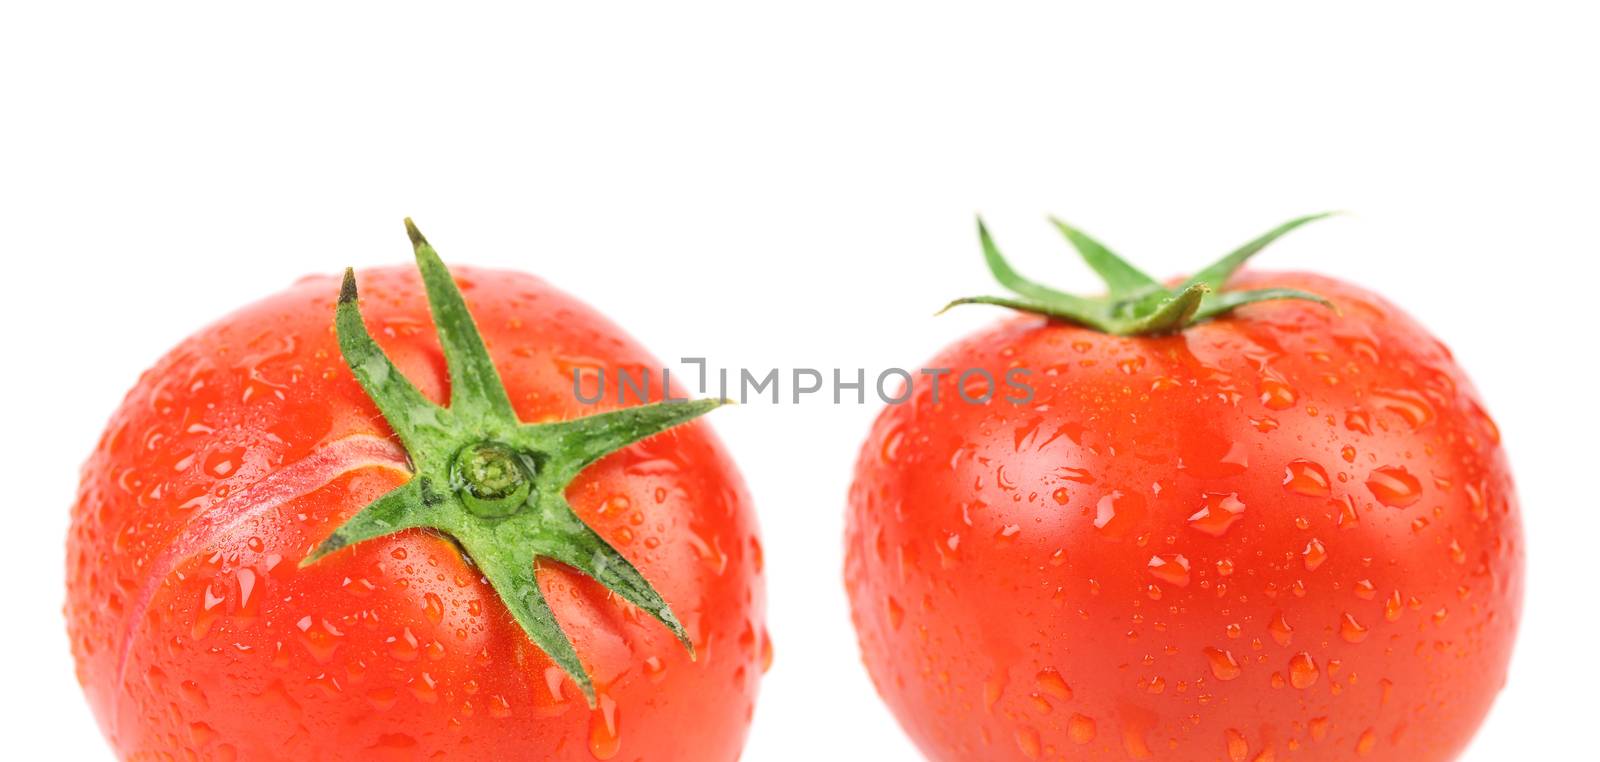 Two tomatoes with water drops. Isolated on a white background.